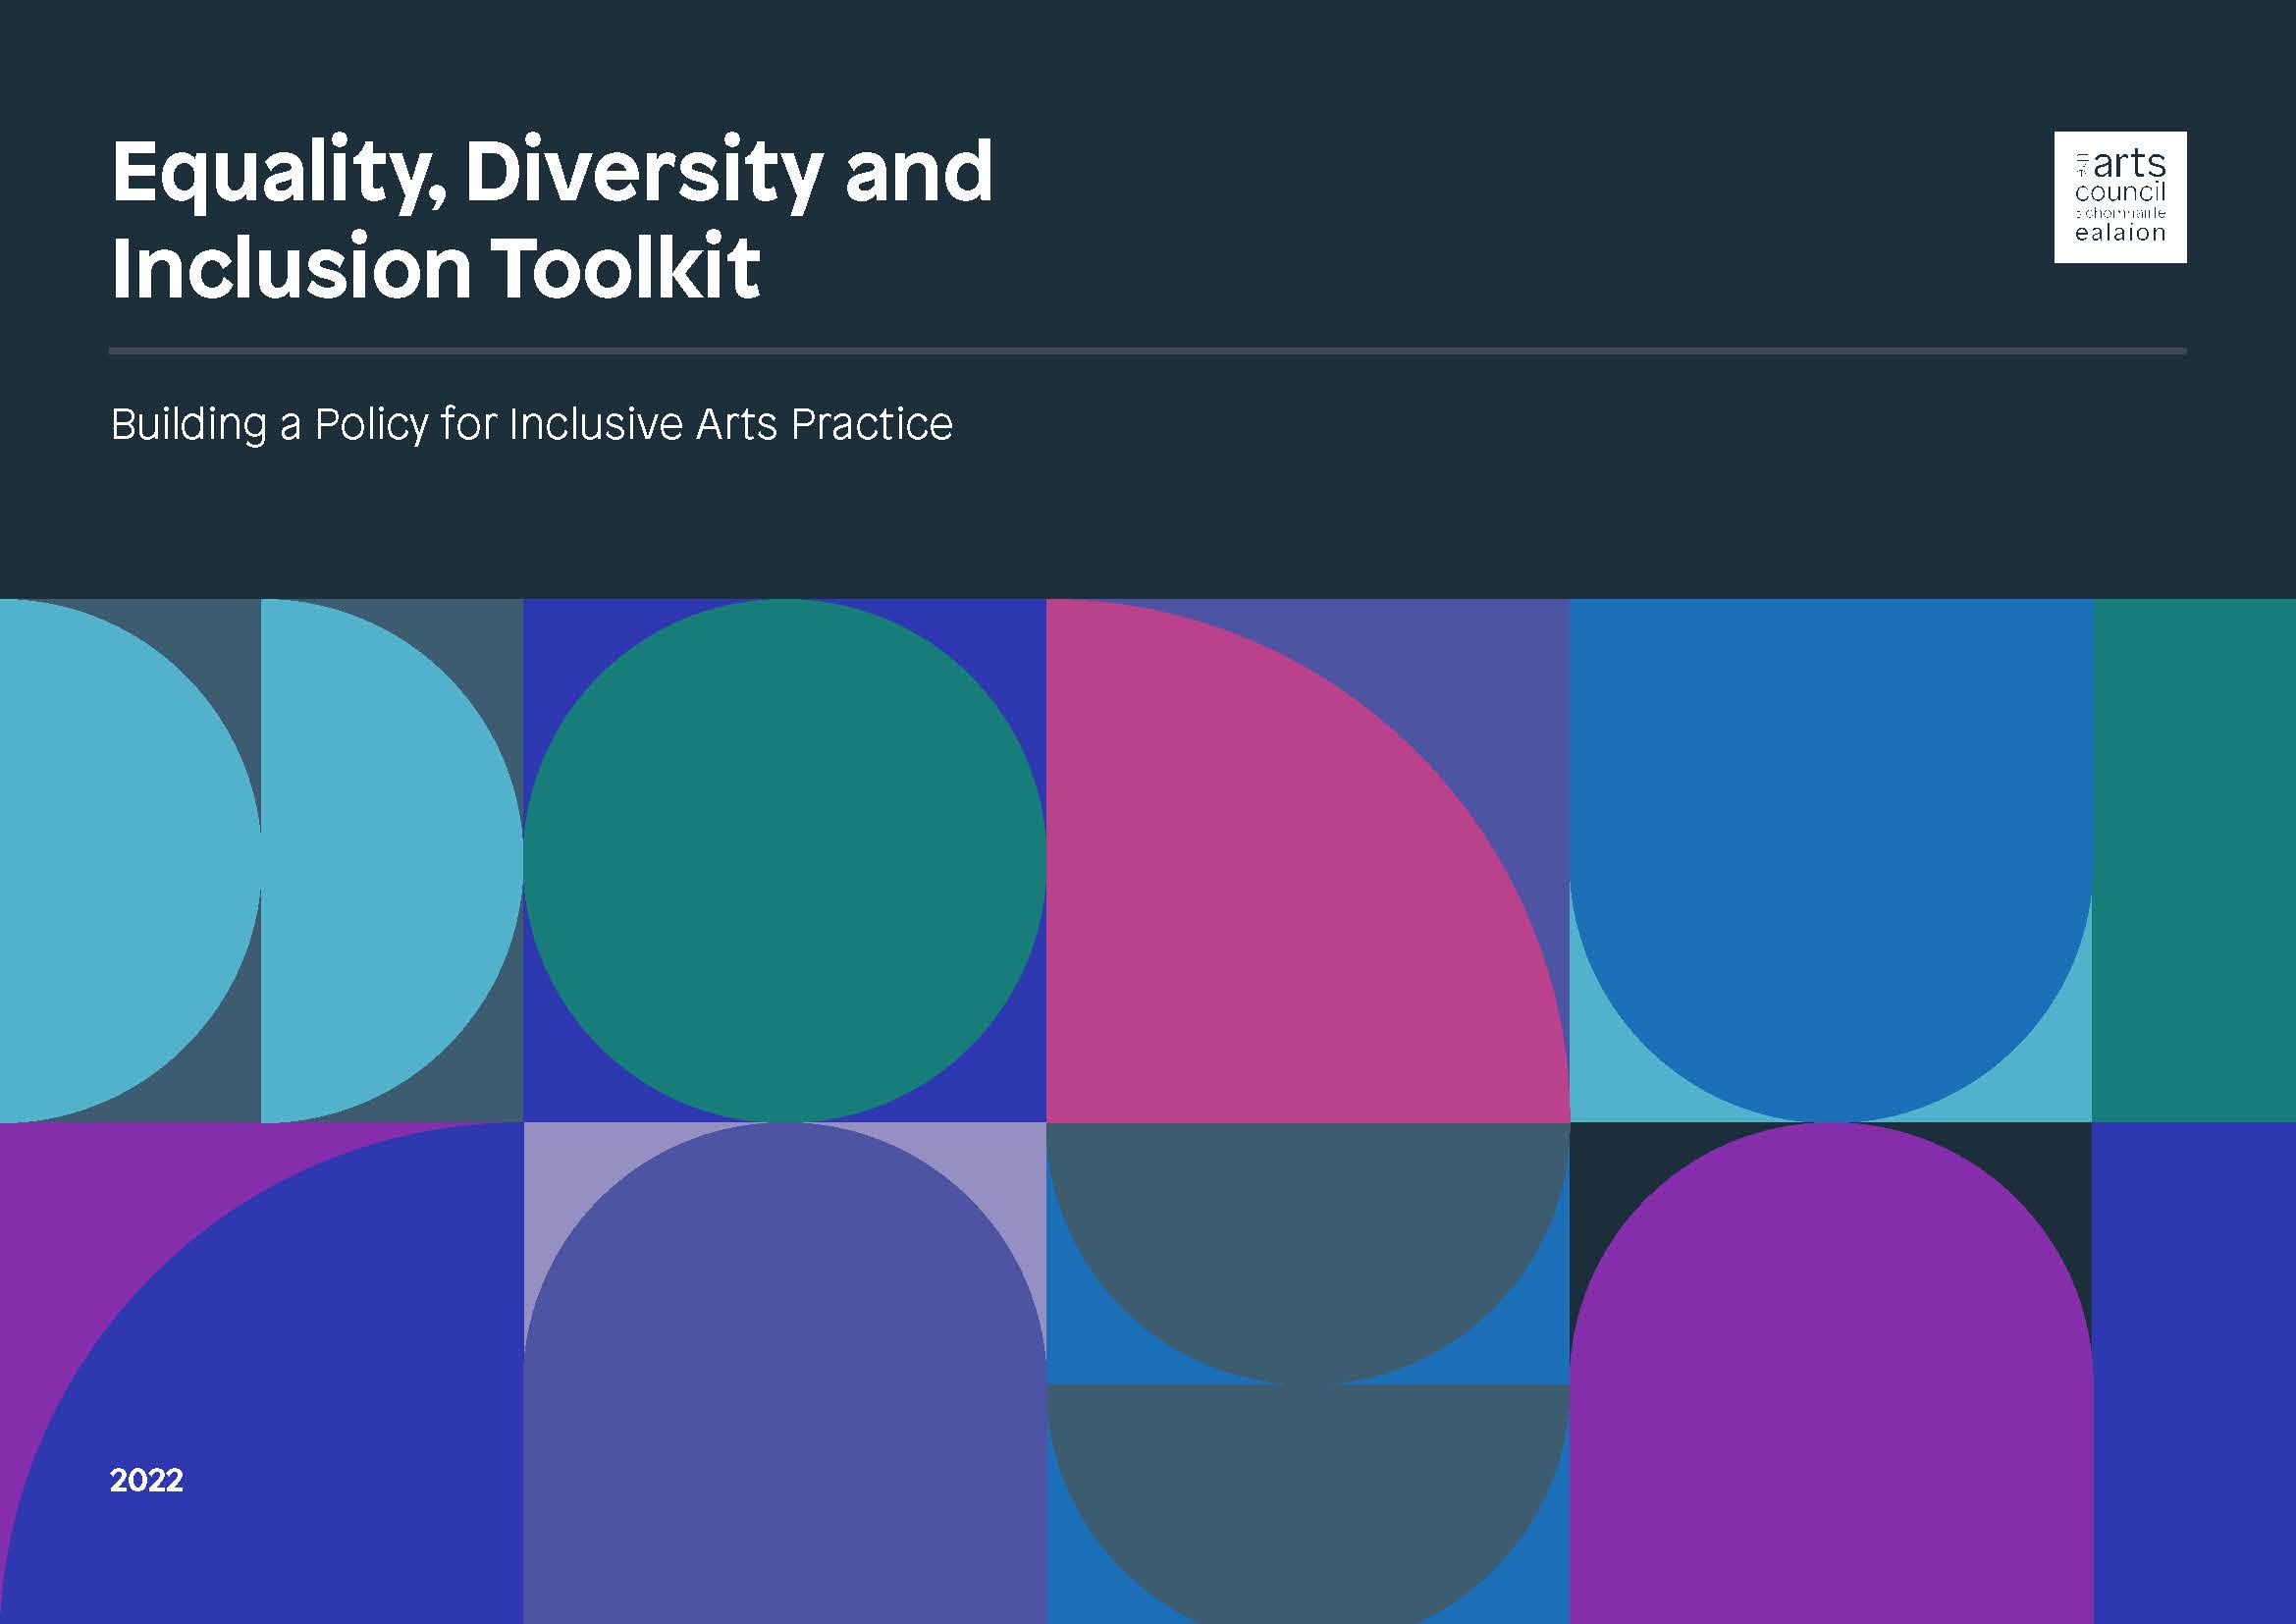 Arts Council's Equality, Diversity and Inclusion Toolkit